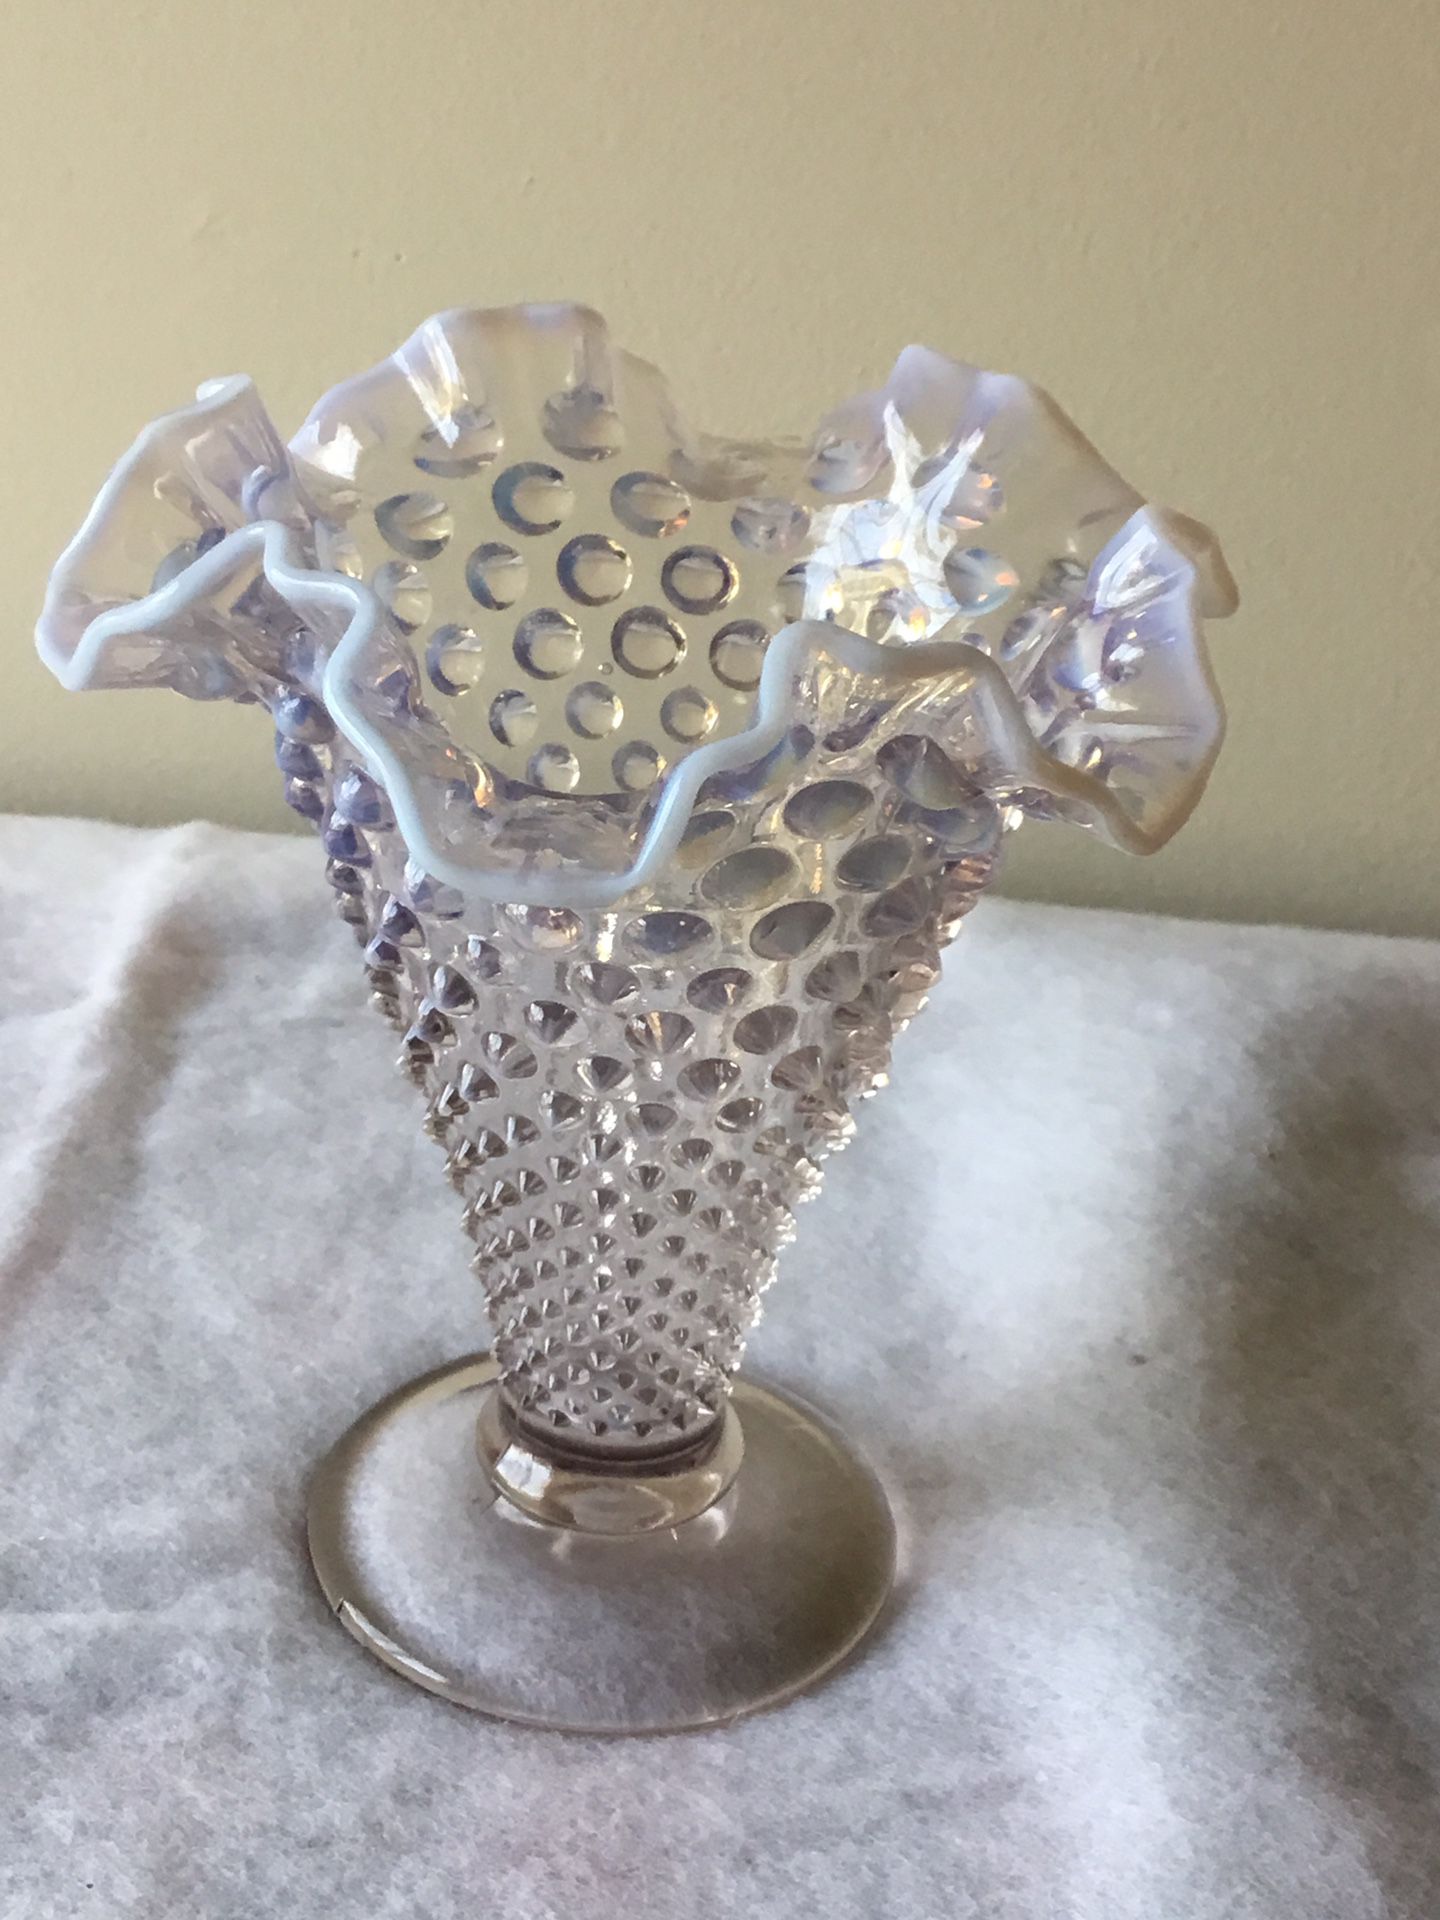 Lovely Vintage Glass Hobnail Vase With Ruffled Top 7” Tall